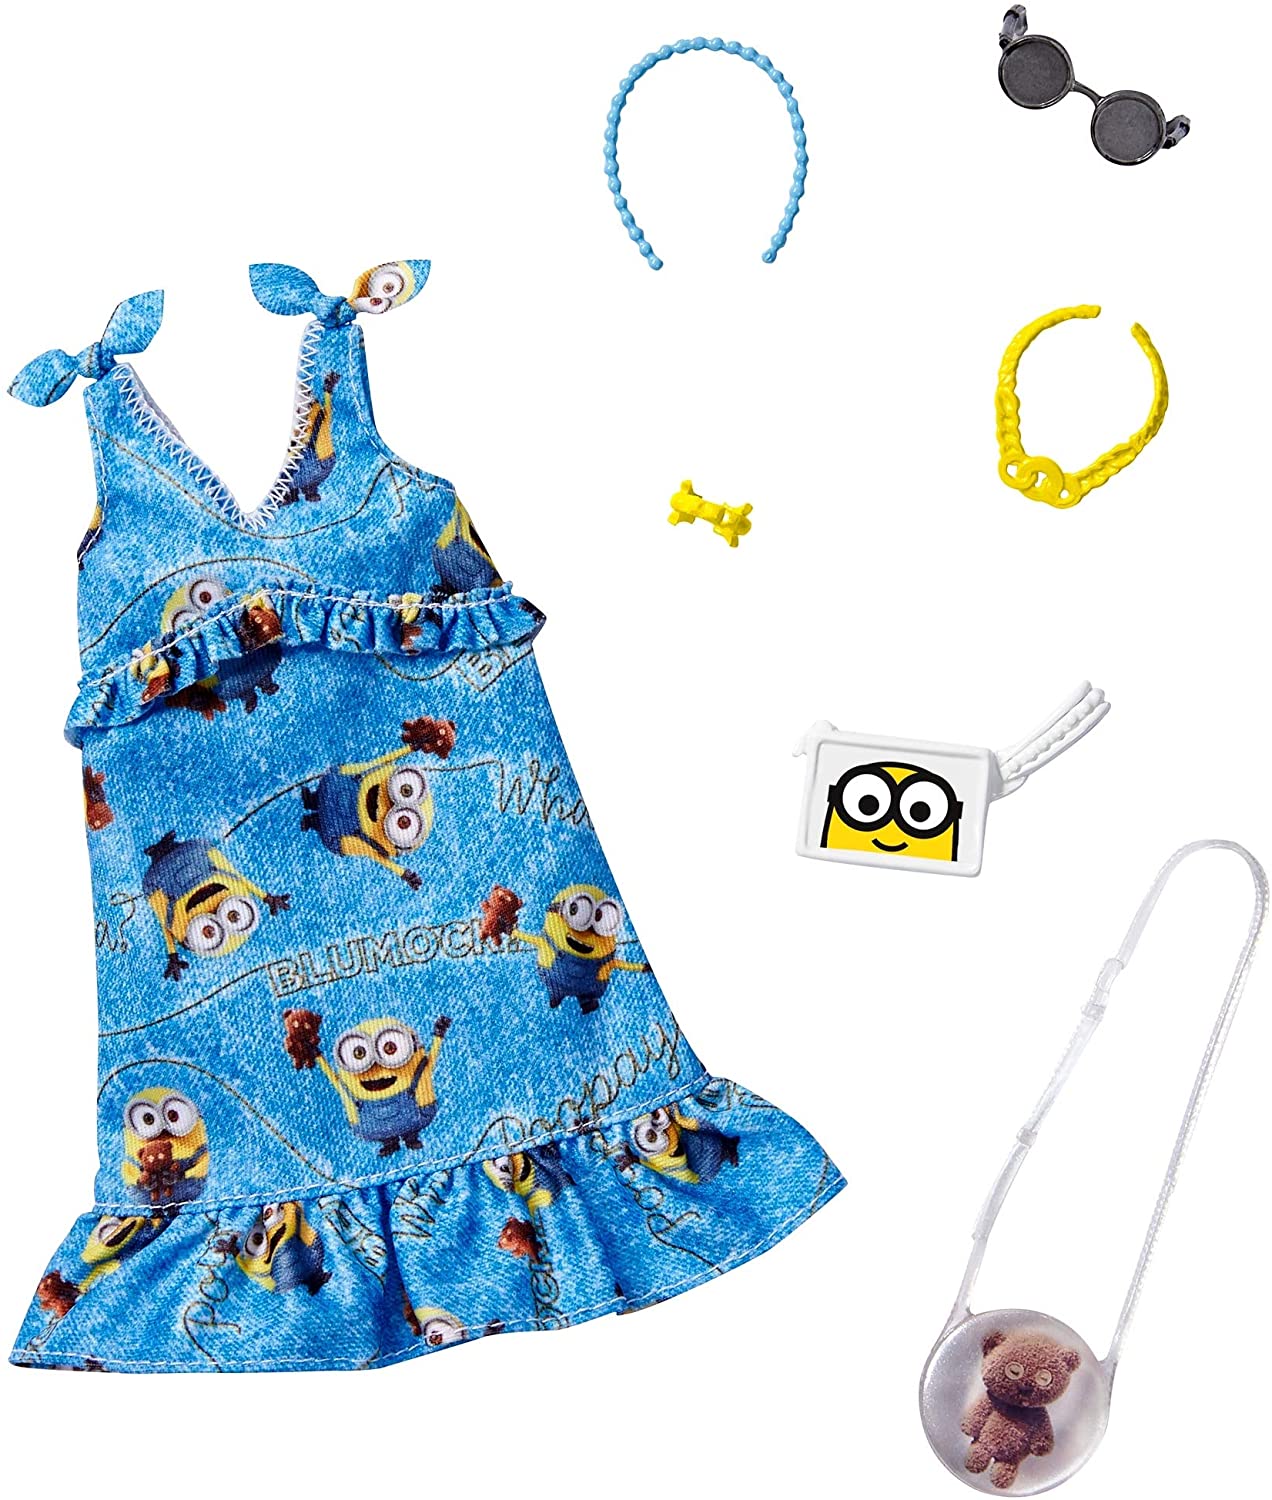 ''Barbie Storytelling Fashion Pack of Doll Clothes Inspired by Minions: Denim DRESS and 6 Accessories